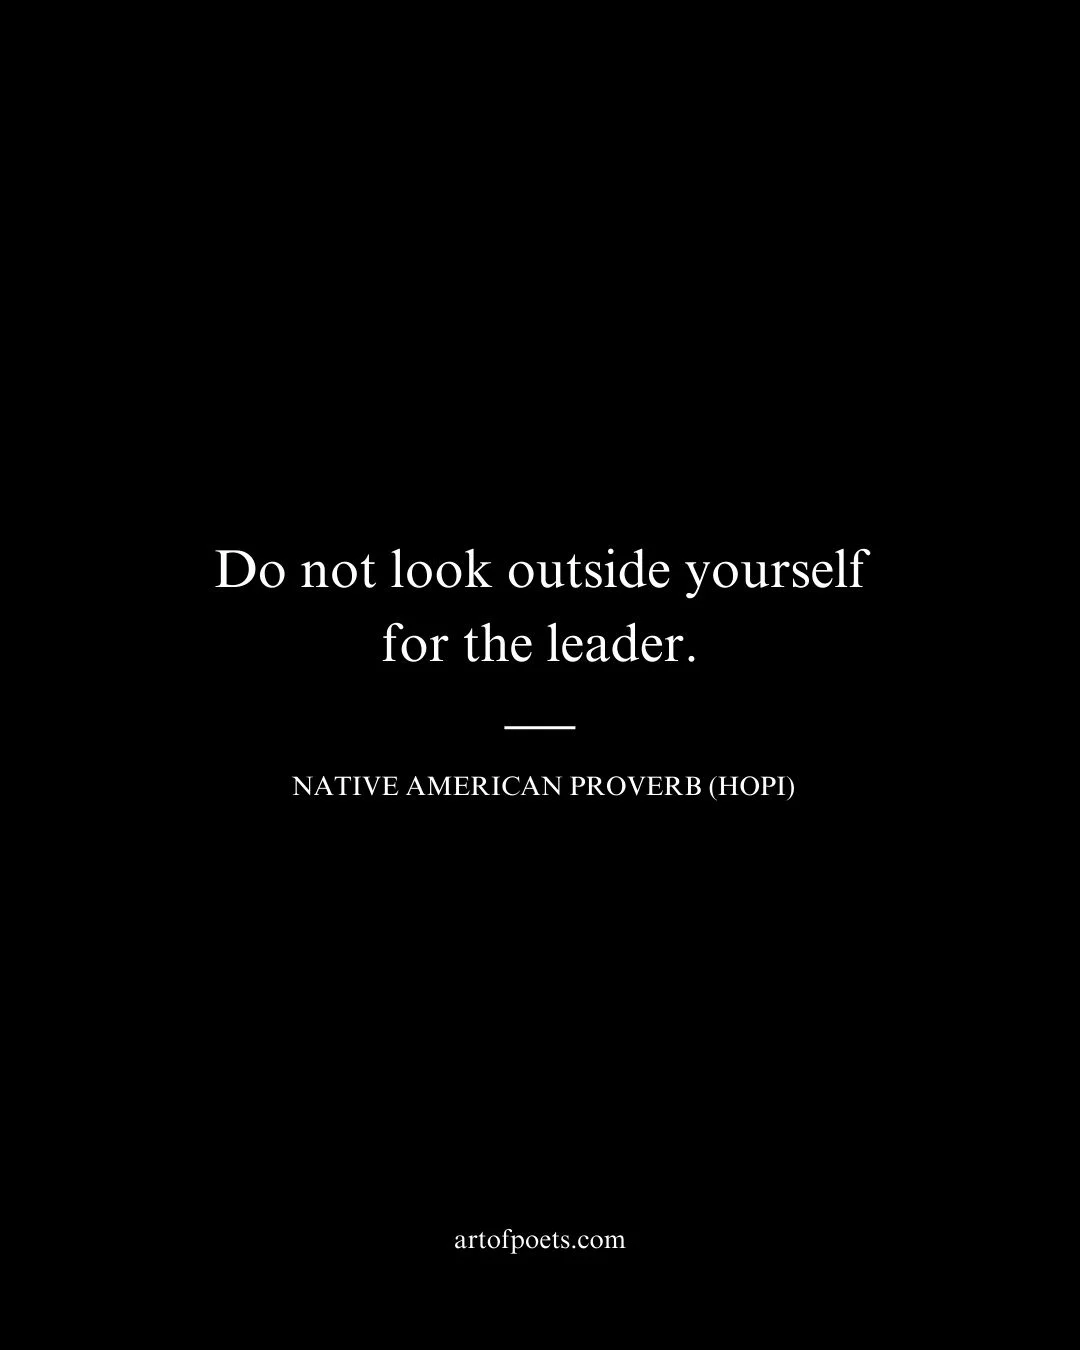 Do not look outside yourself for the leader